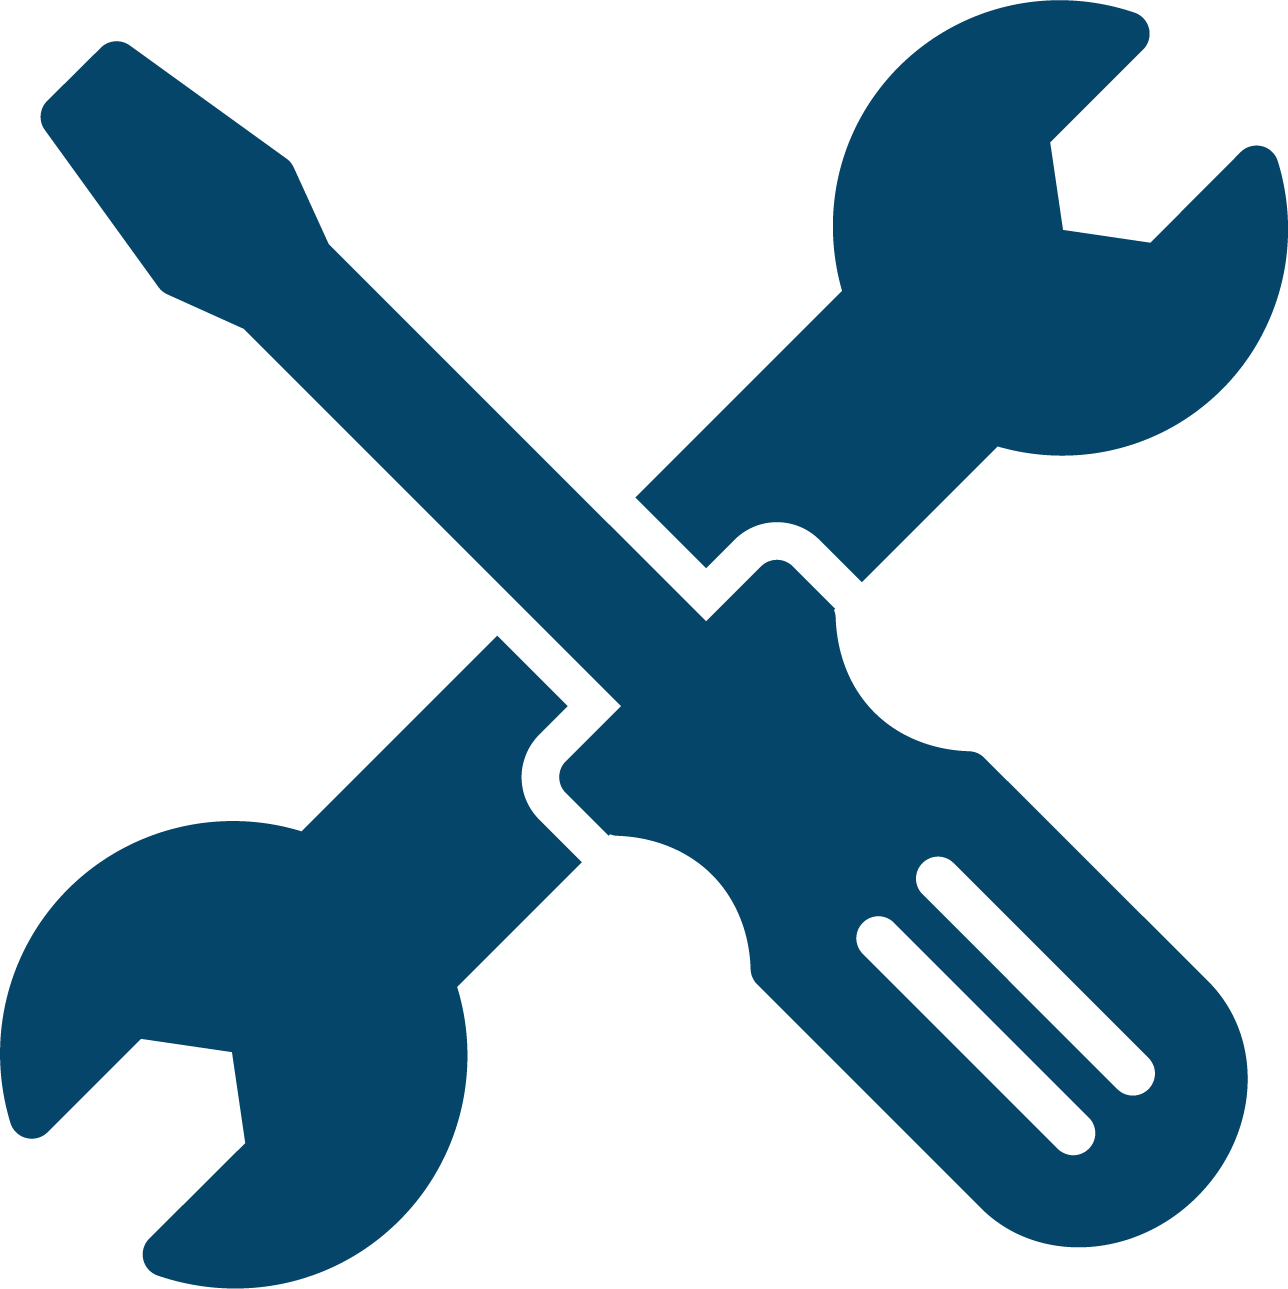 Customized VRF solutions alt text: Dark blue icon of a flathead screwdriver laid over a two-sided wrench to form an X.